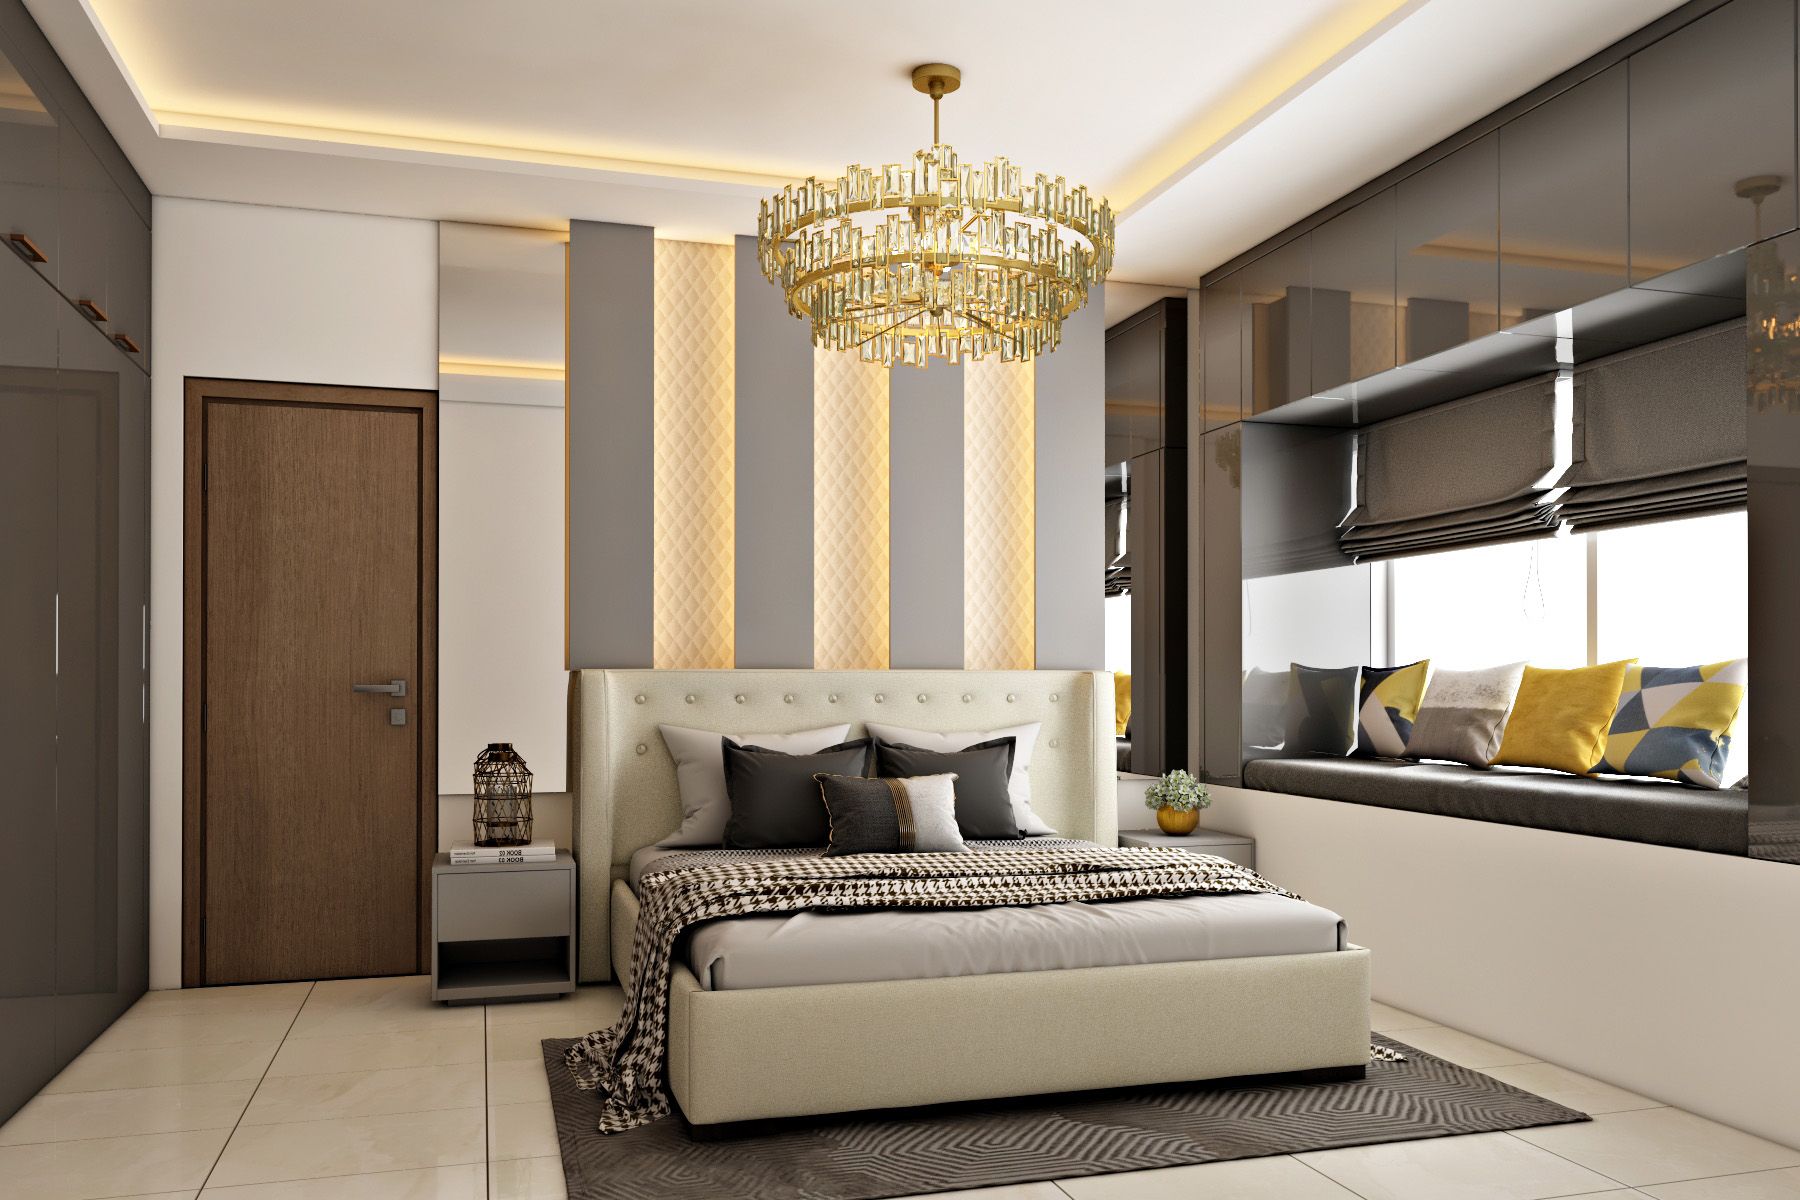 Modern Grey And Beige Bedroom Wall Design With Wall Panel And Diamond-Shaped Wallpaper